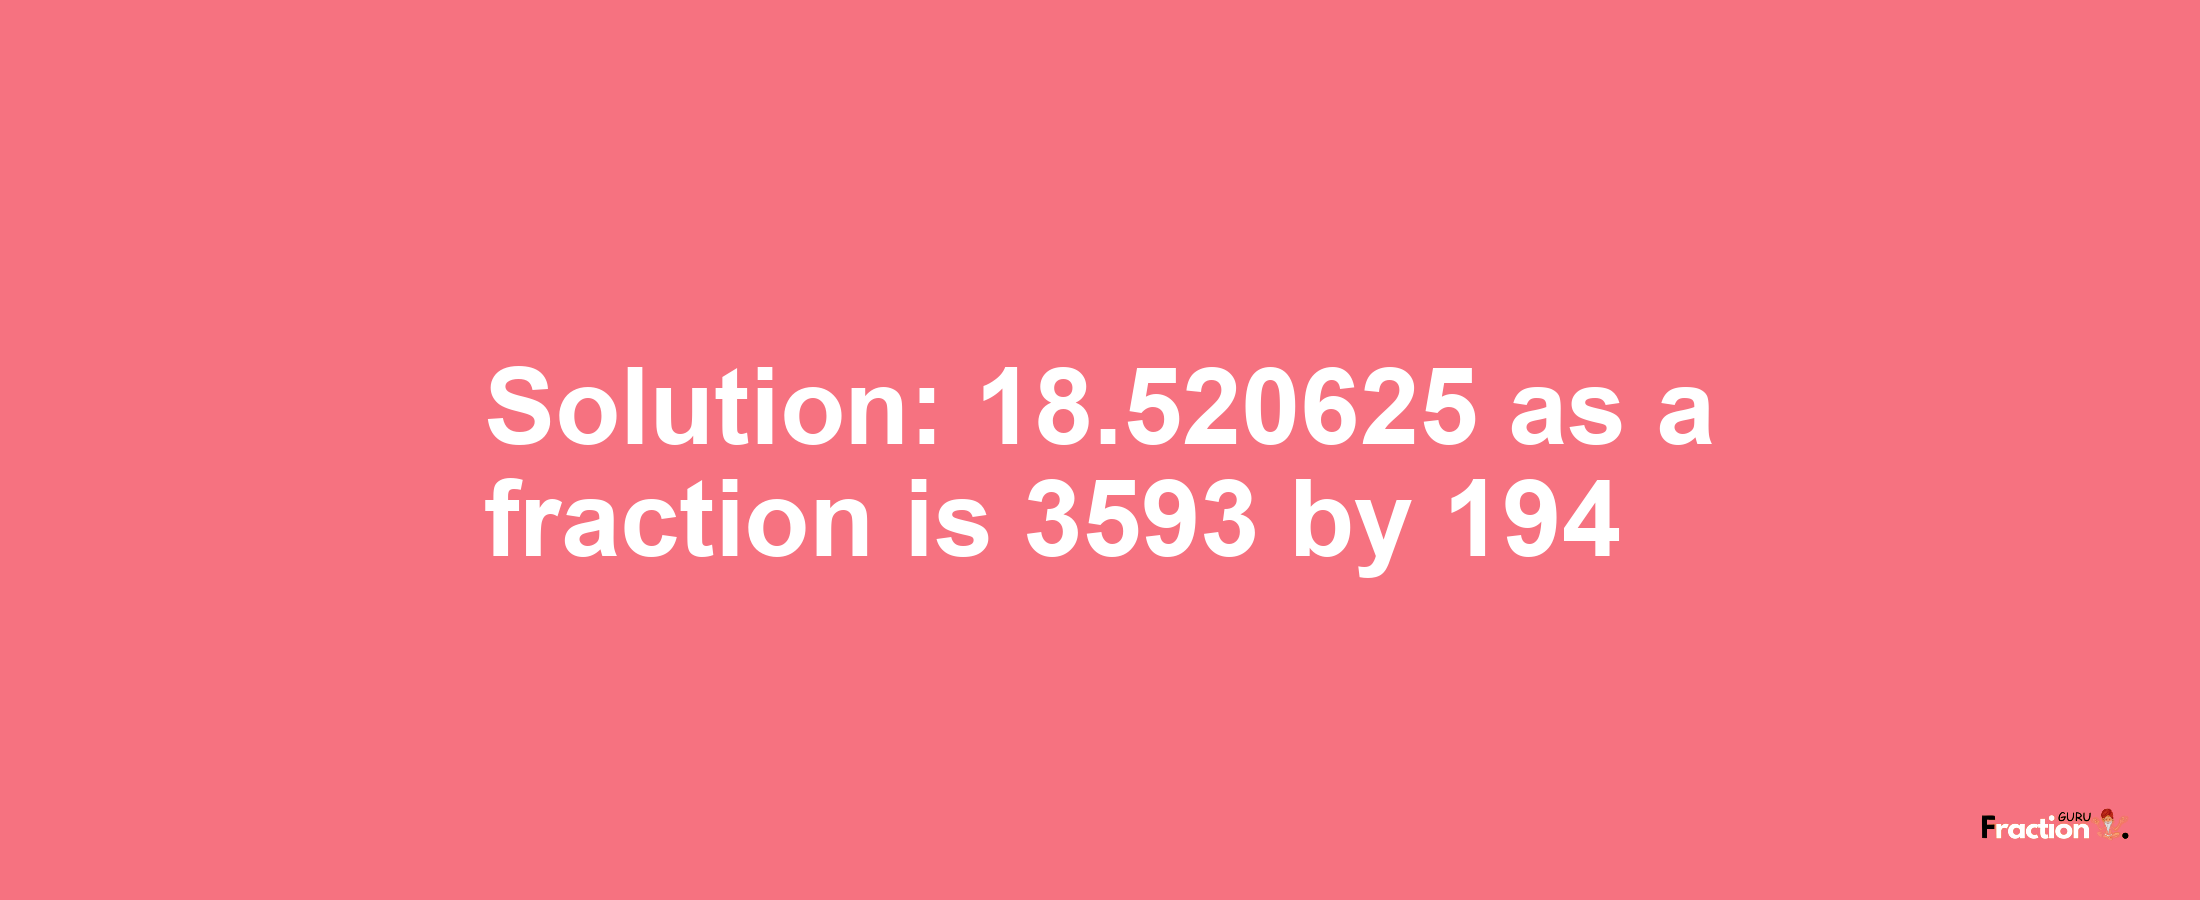 Solution:18.520625 as a fraction is 3593/194